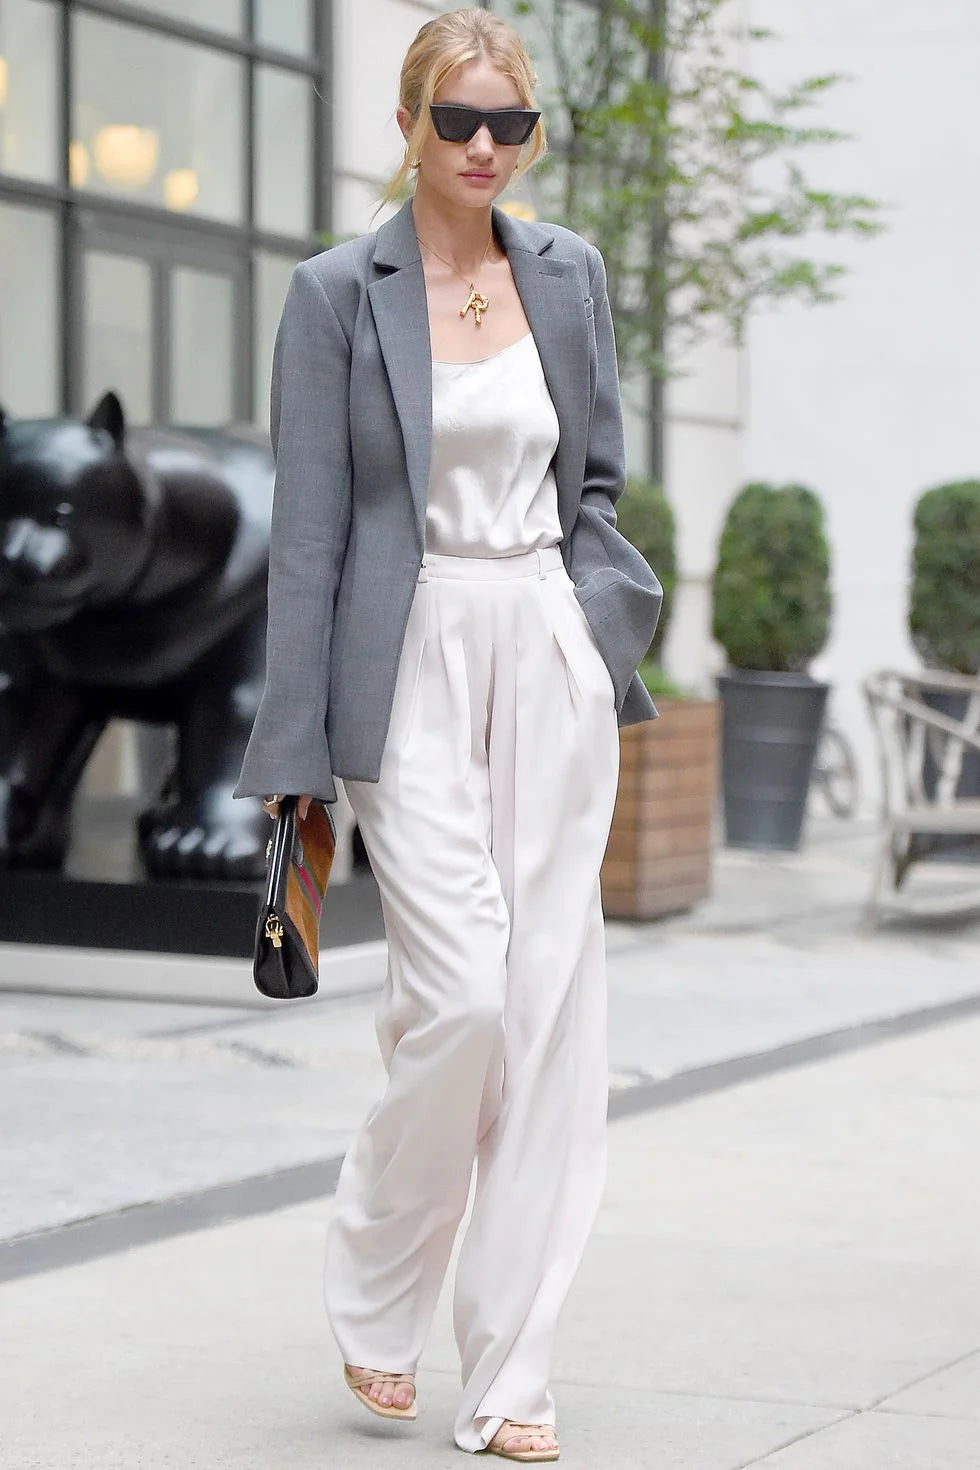 Best Brunch Outfit Ideas for Summer – Paloma St James